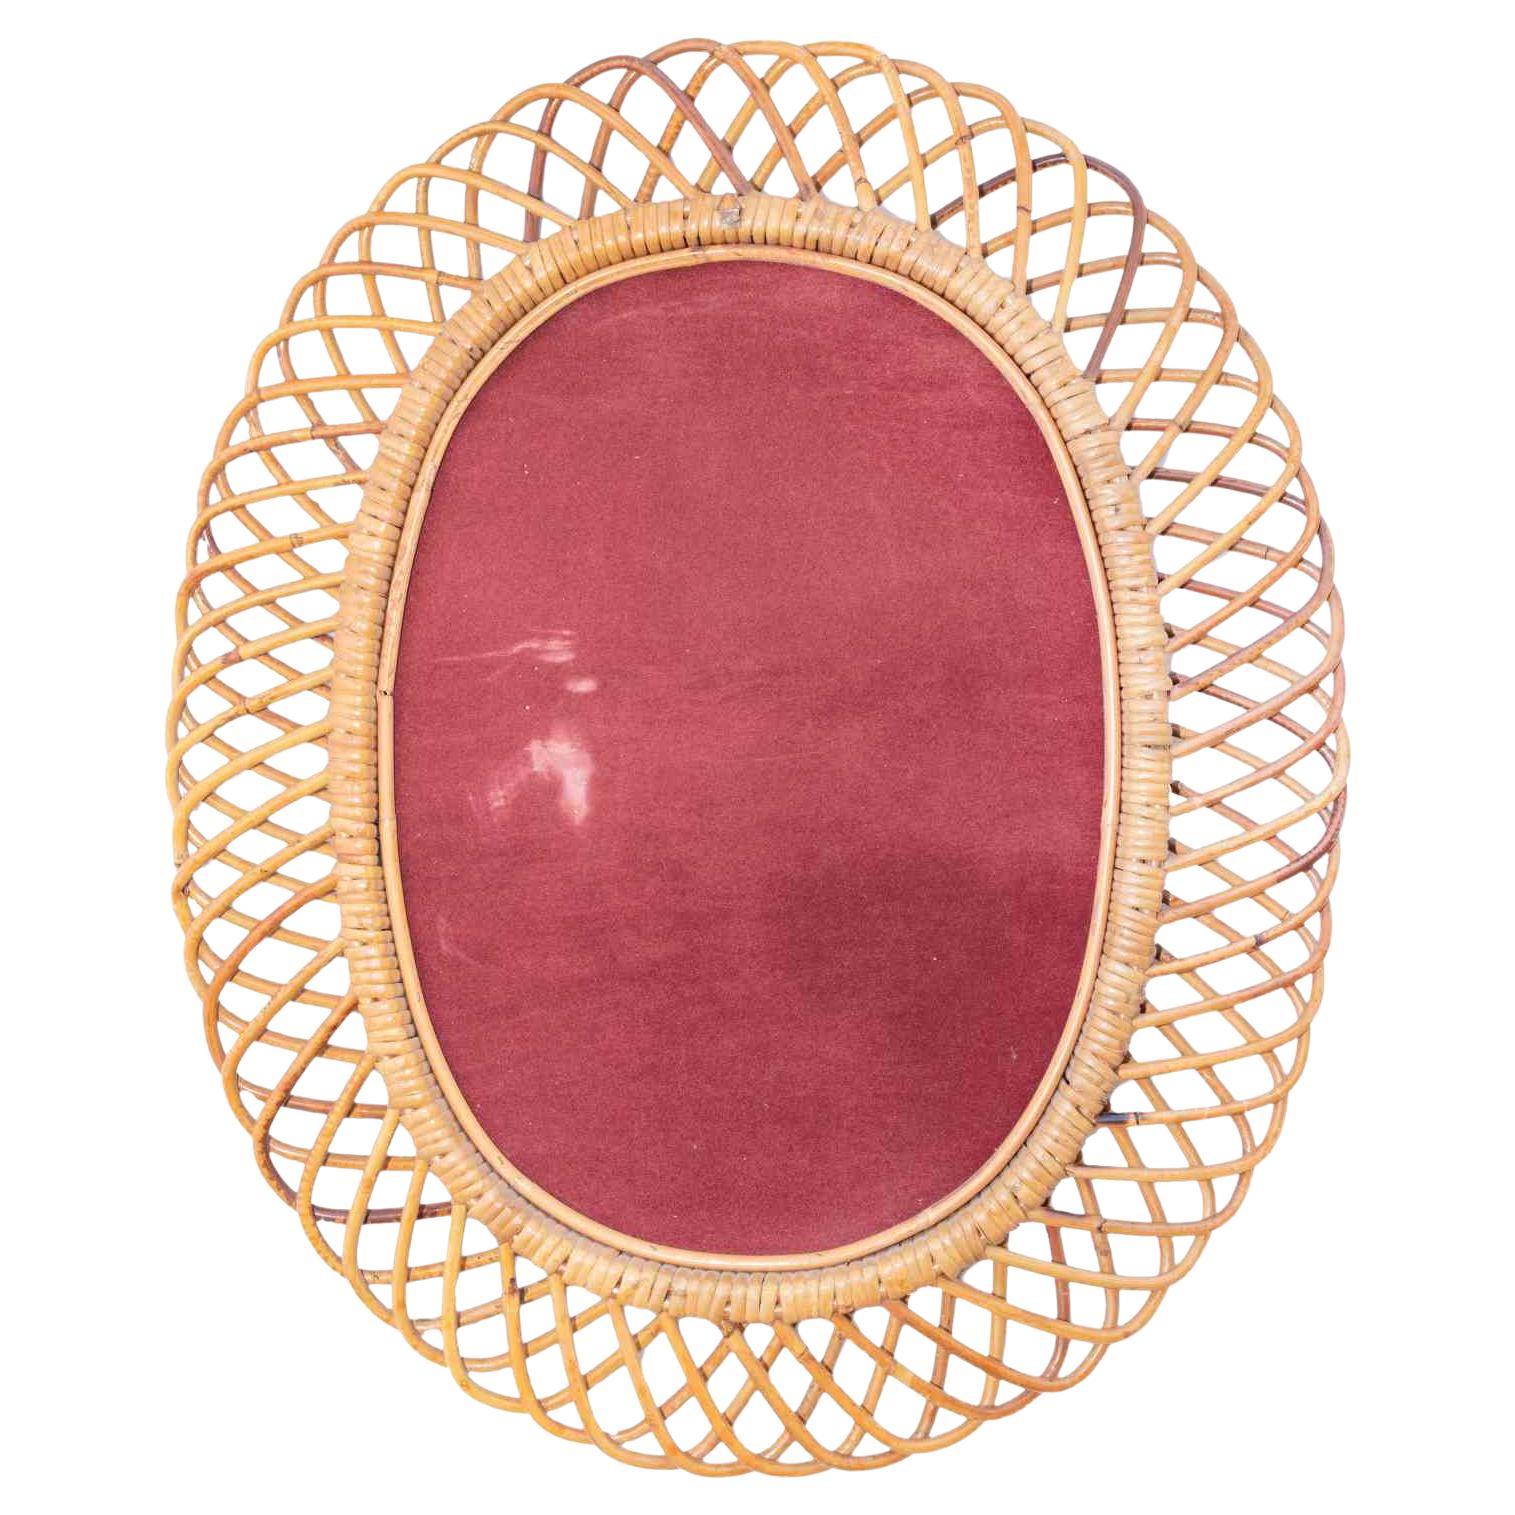 This Rattan Wall Mirror is an original decorative object manufactured by the Italian company Bonacina between 1950s/1960s.

The material of this mirror is the so-called midollino, that is rattan , a sort of climbing palm widespread in tropical and